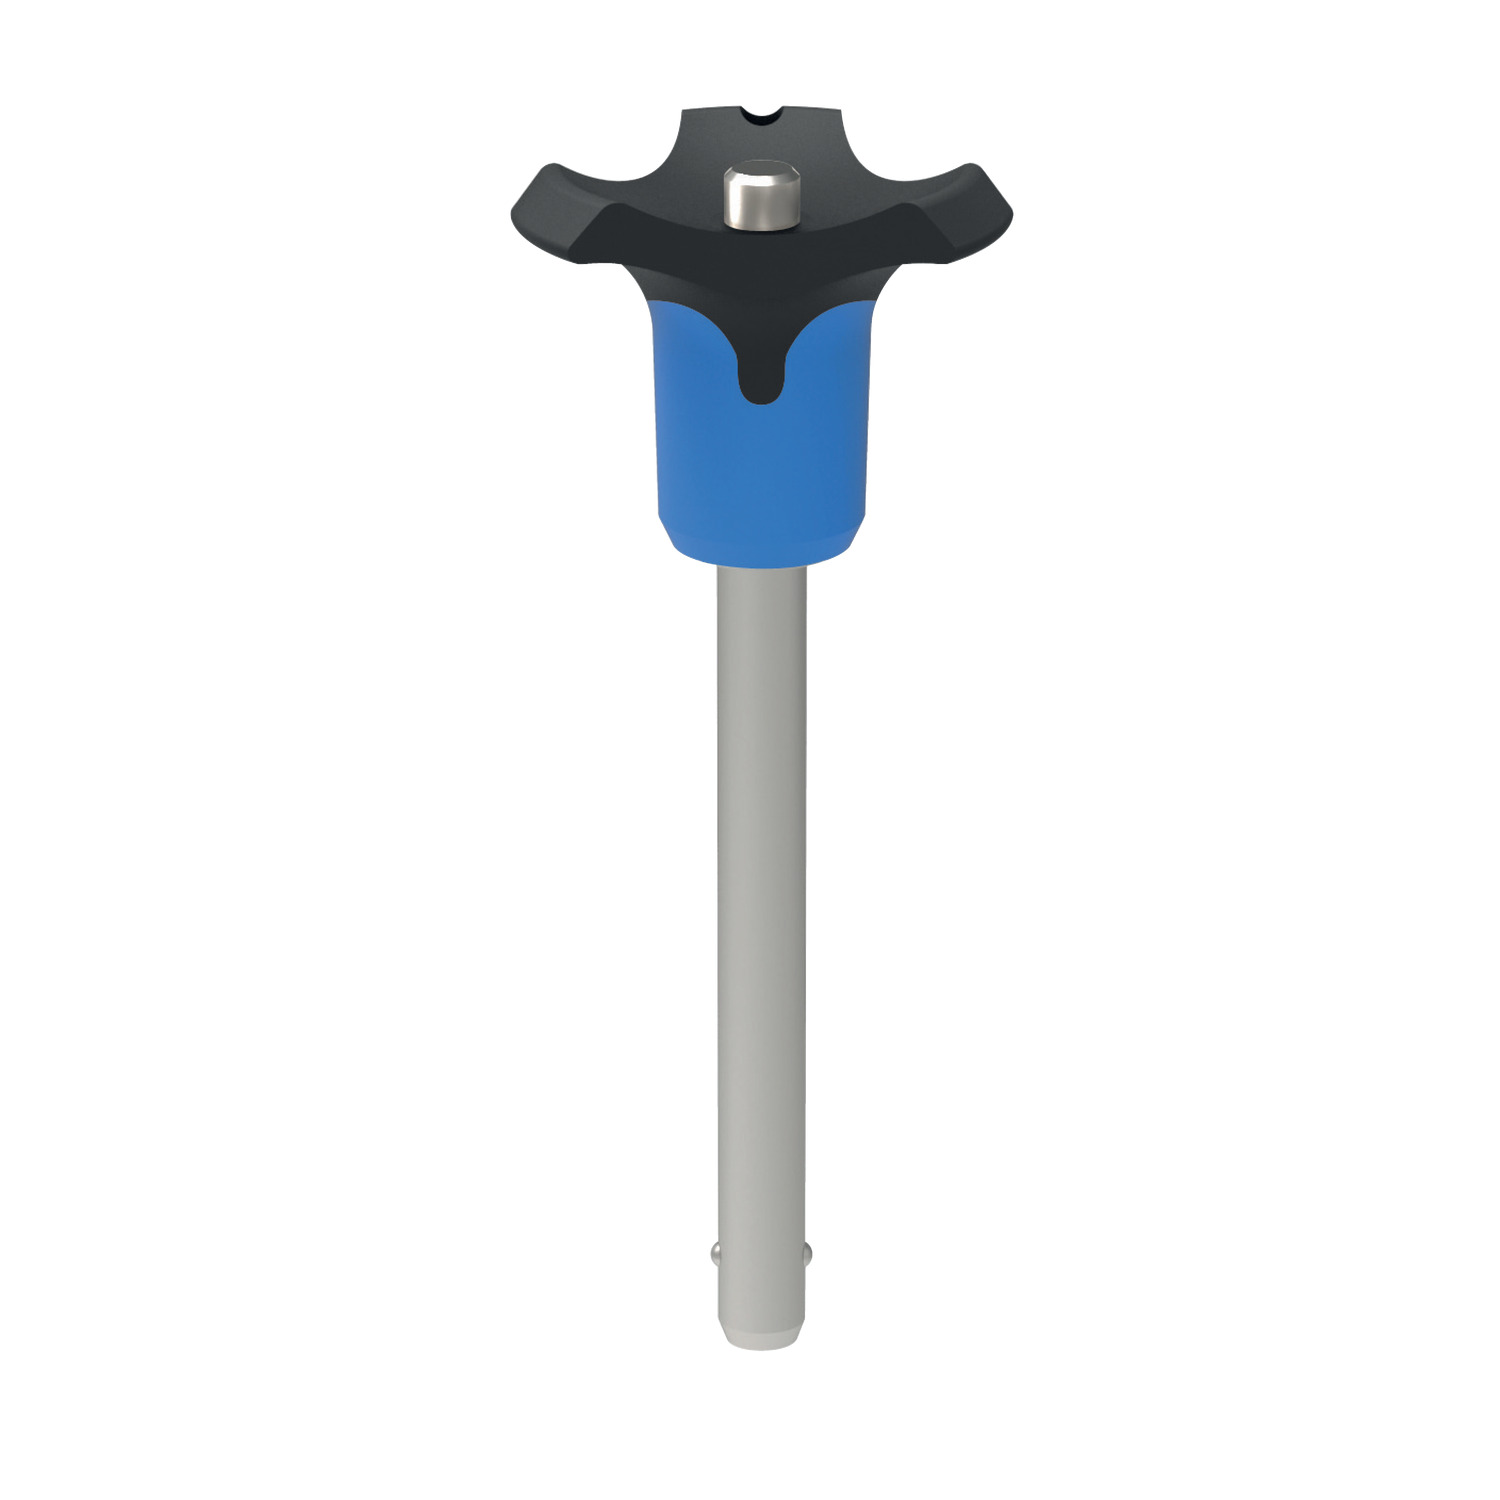 Ball Lock Pins - Single Acting - Blue Plastic Handle Single Acting Plastic Handle Ball Lock Pins in four different colours (orange, blue, grey and black) to co-ordinate with your required application colour scheme. For repeated connection of parts, with high sheer forces.